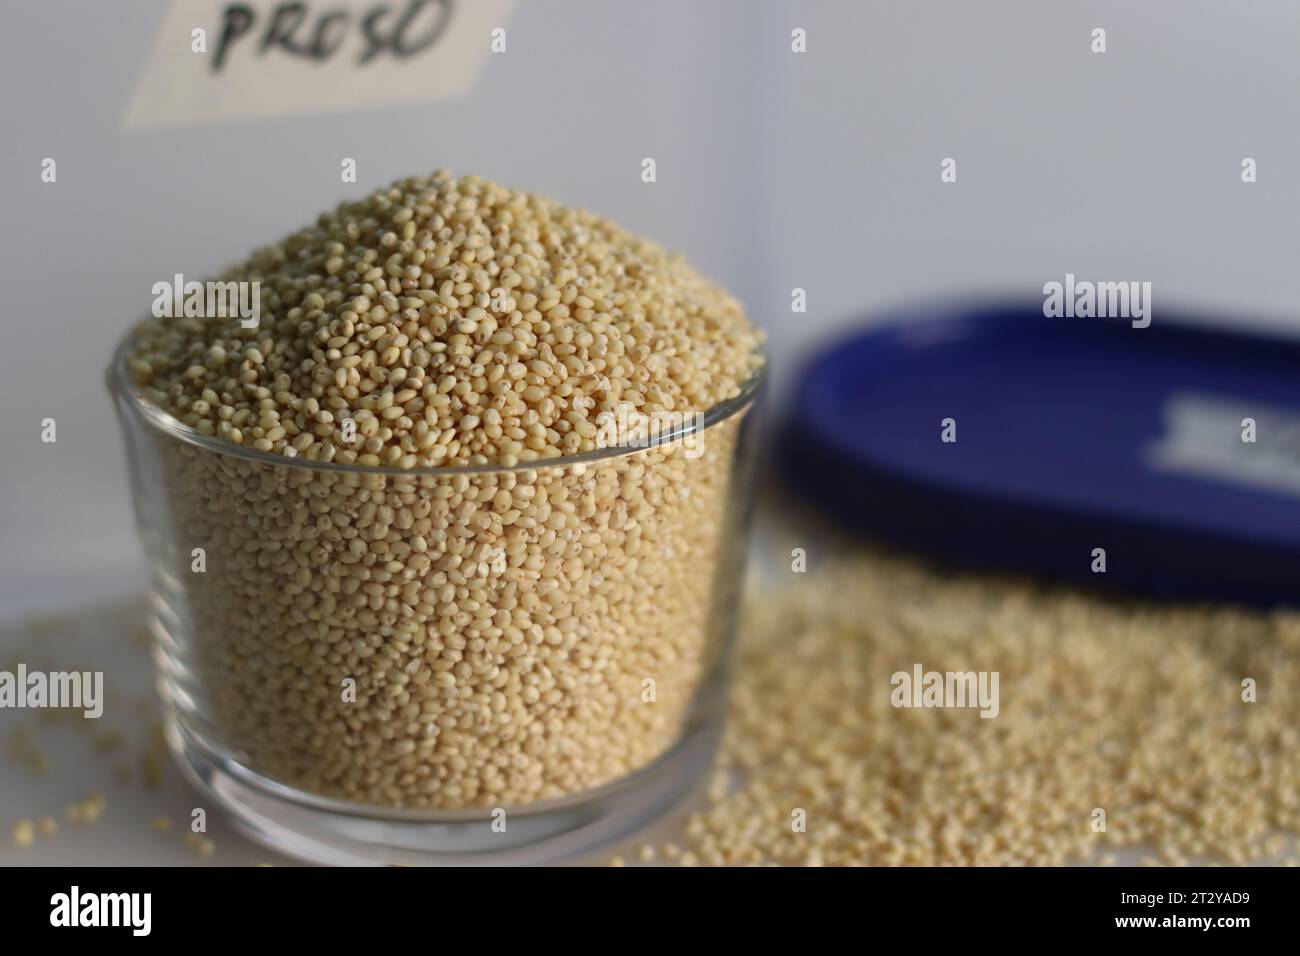 Proso millet, tiny round seeds with a golden hue kept in a container and glass bowl filled to the brim. Nutritious gluten free and versatile staple, s Stock Photo